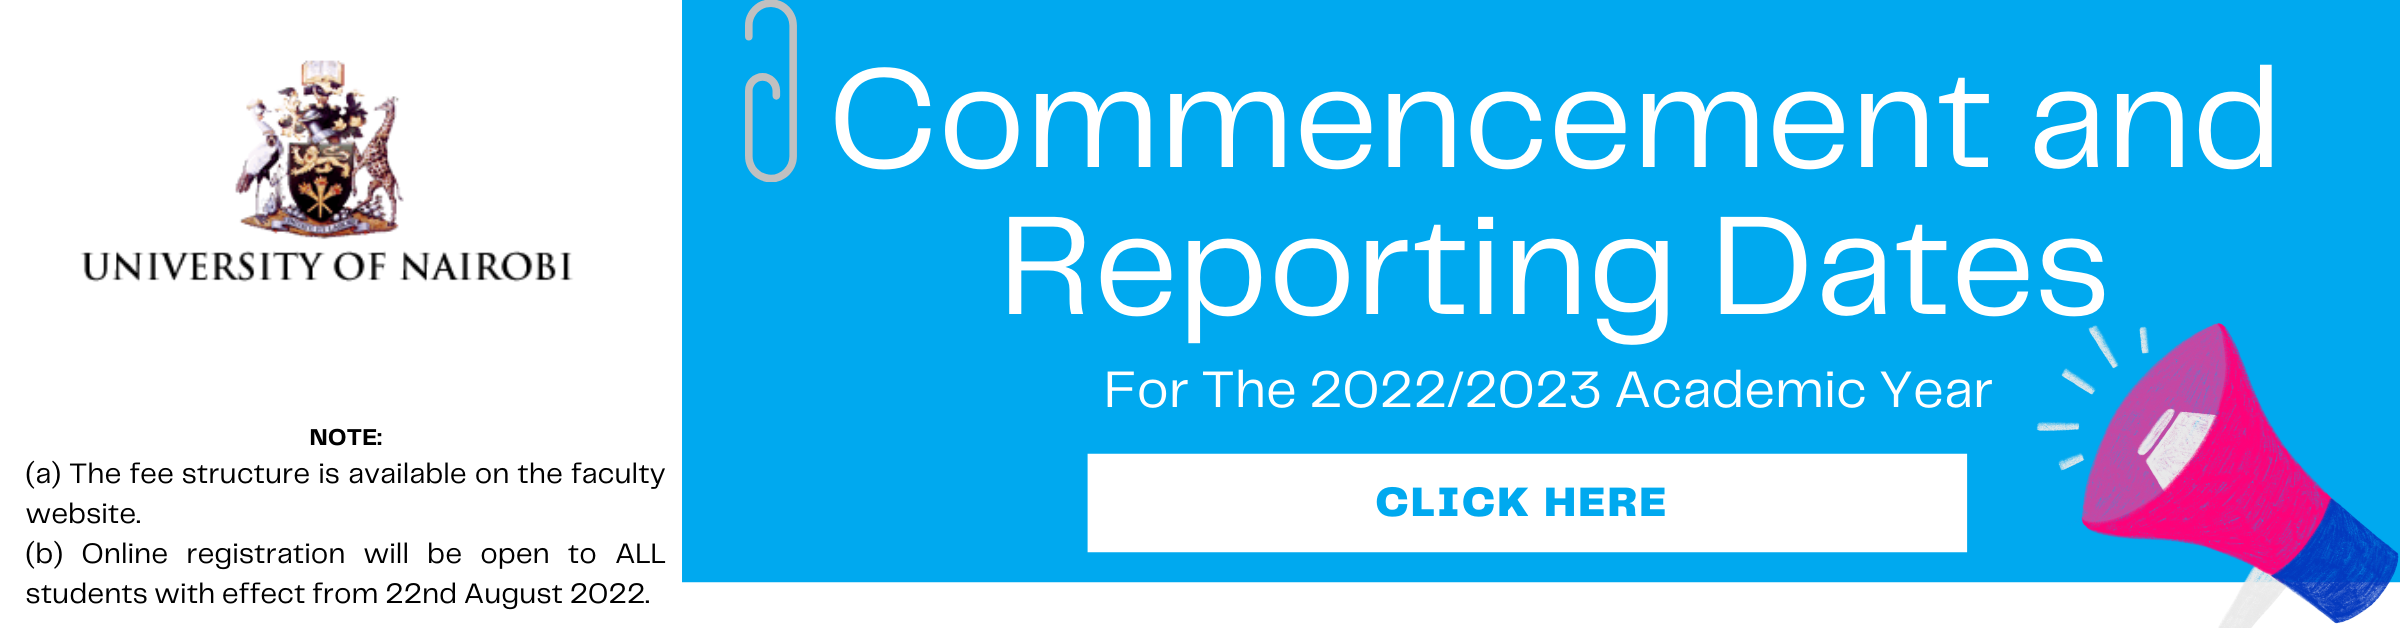 COMMENCEMENT AND REPORTING DATES (2400 × 628 px).png